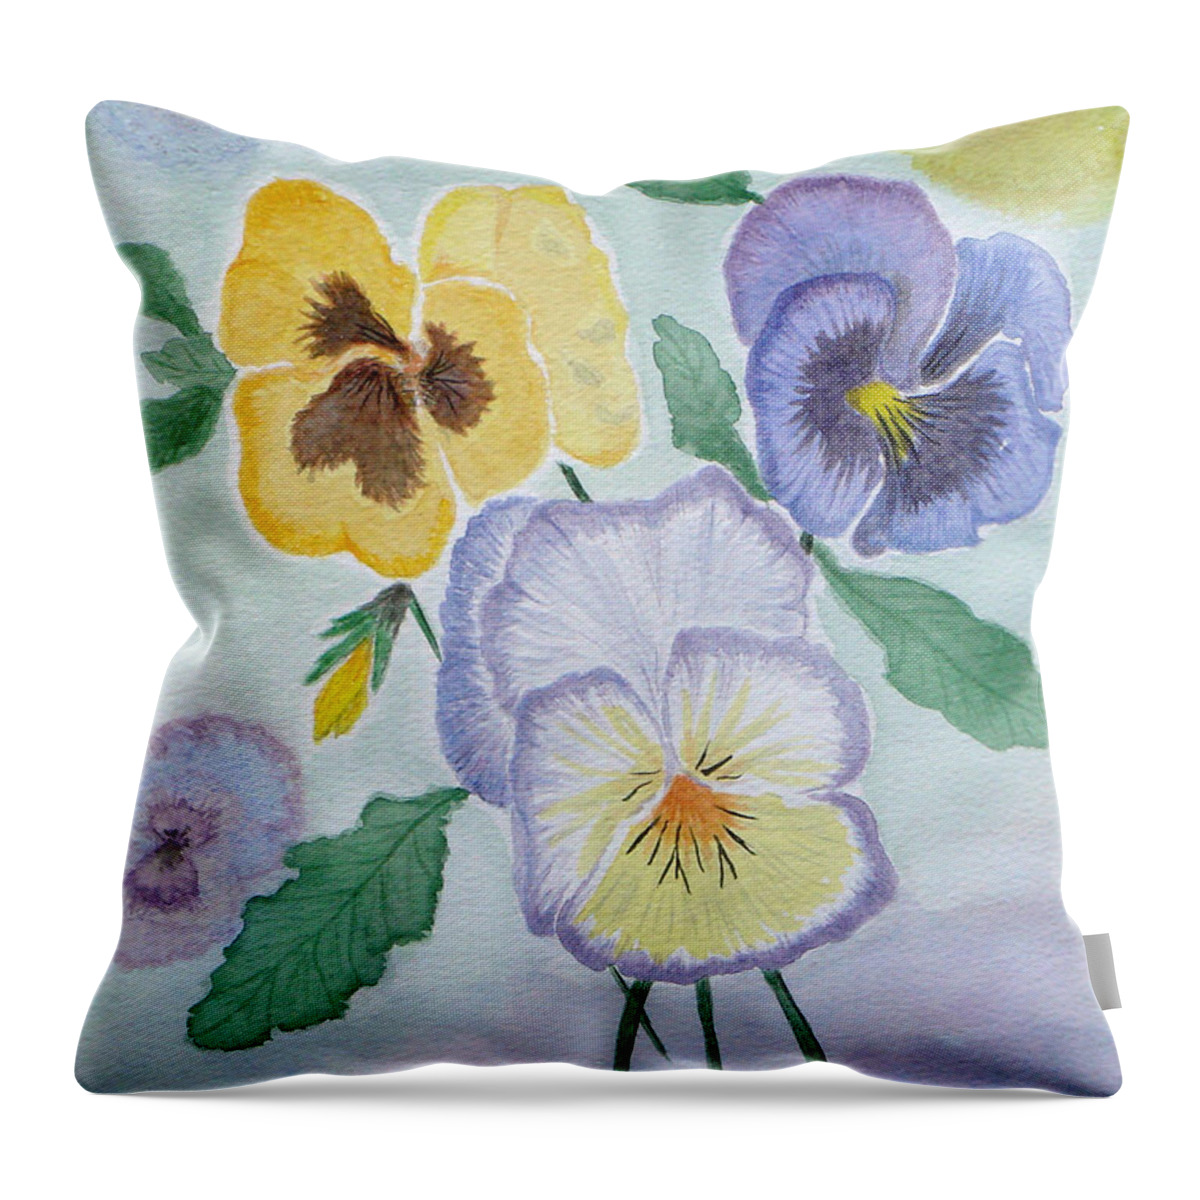 Pansy Throw Pillow featuring the painting Pansies by Yvonne Johnstone